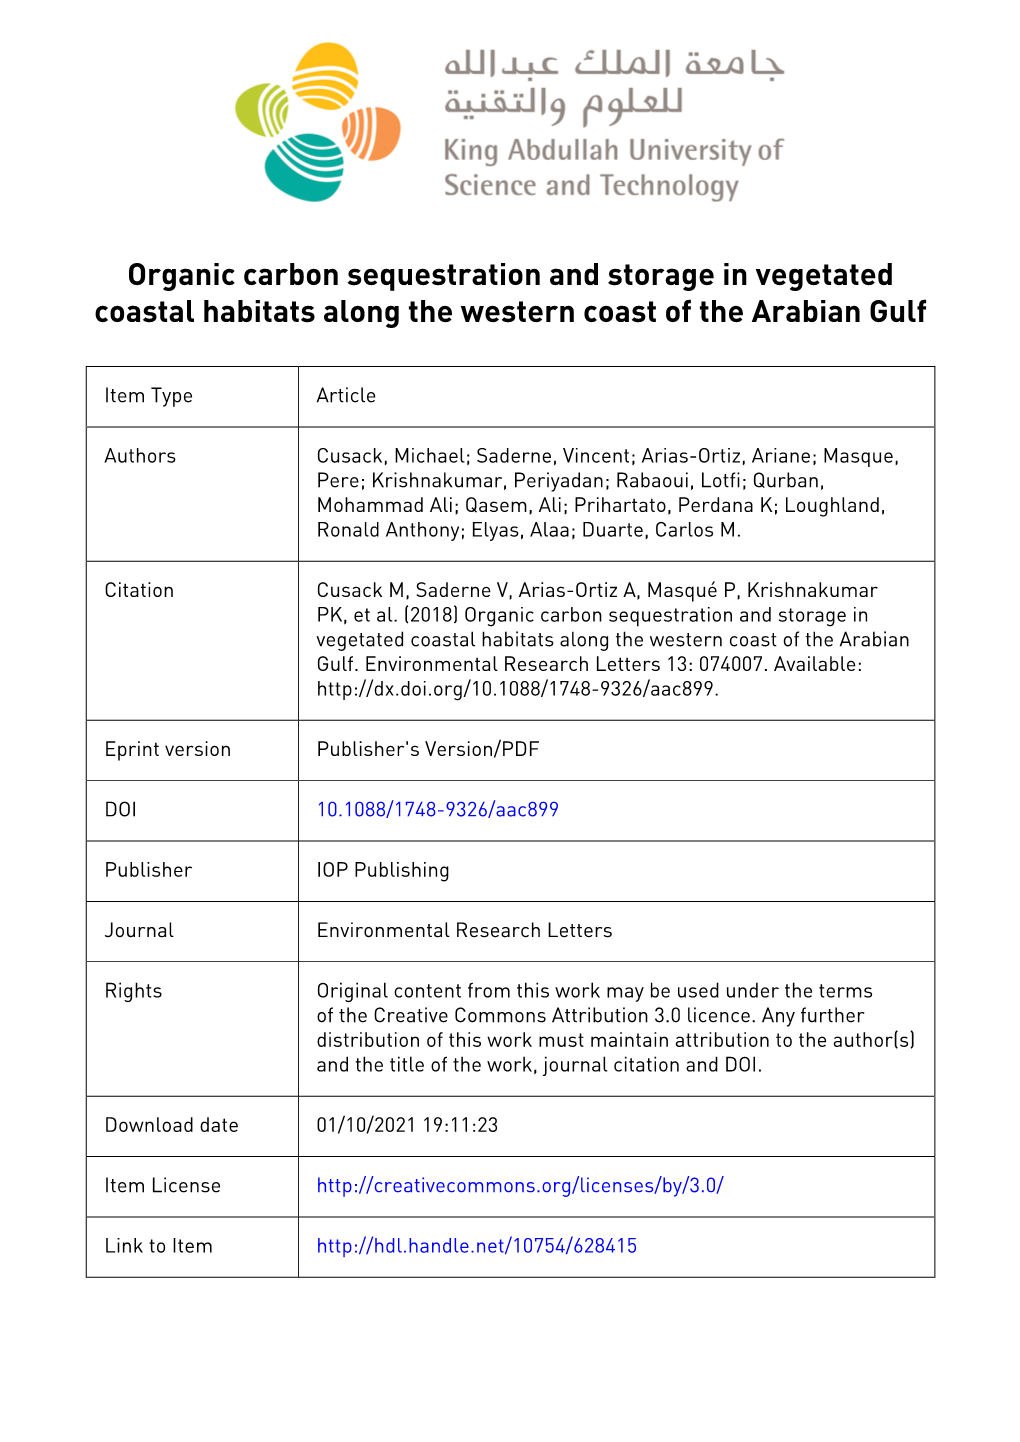 Organic Carbon Sequestration and Storage in Vegetated Coastal Habitats Along the Western Coast of the Arabian Gulf